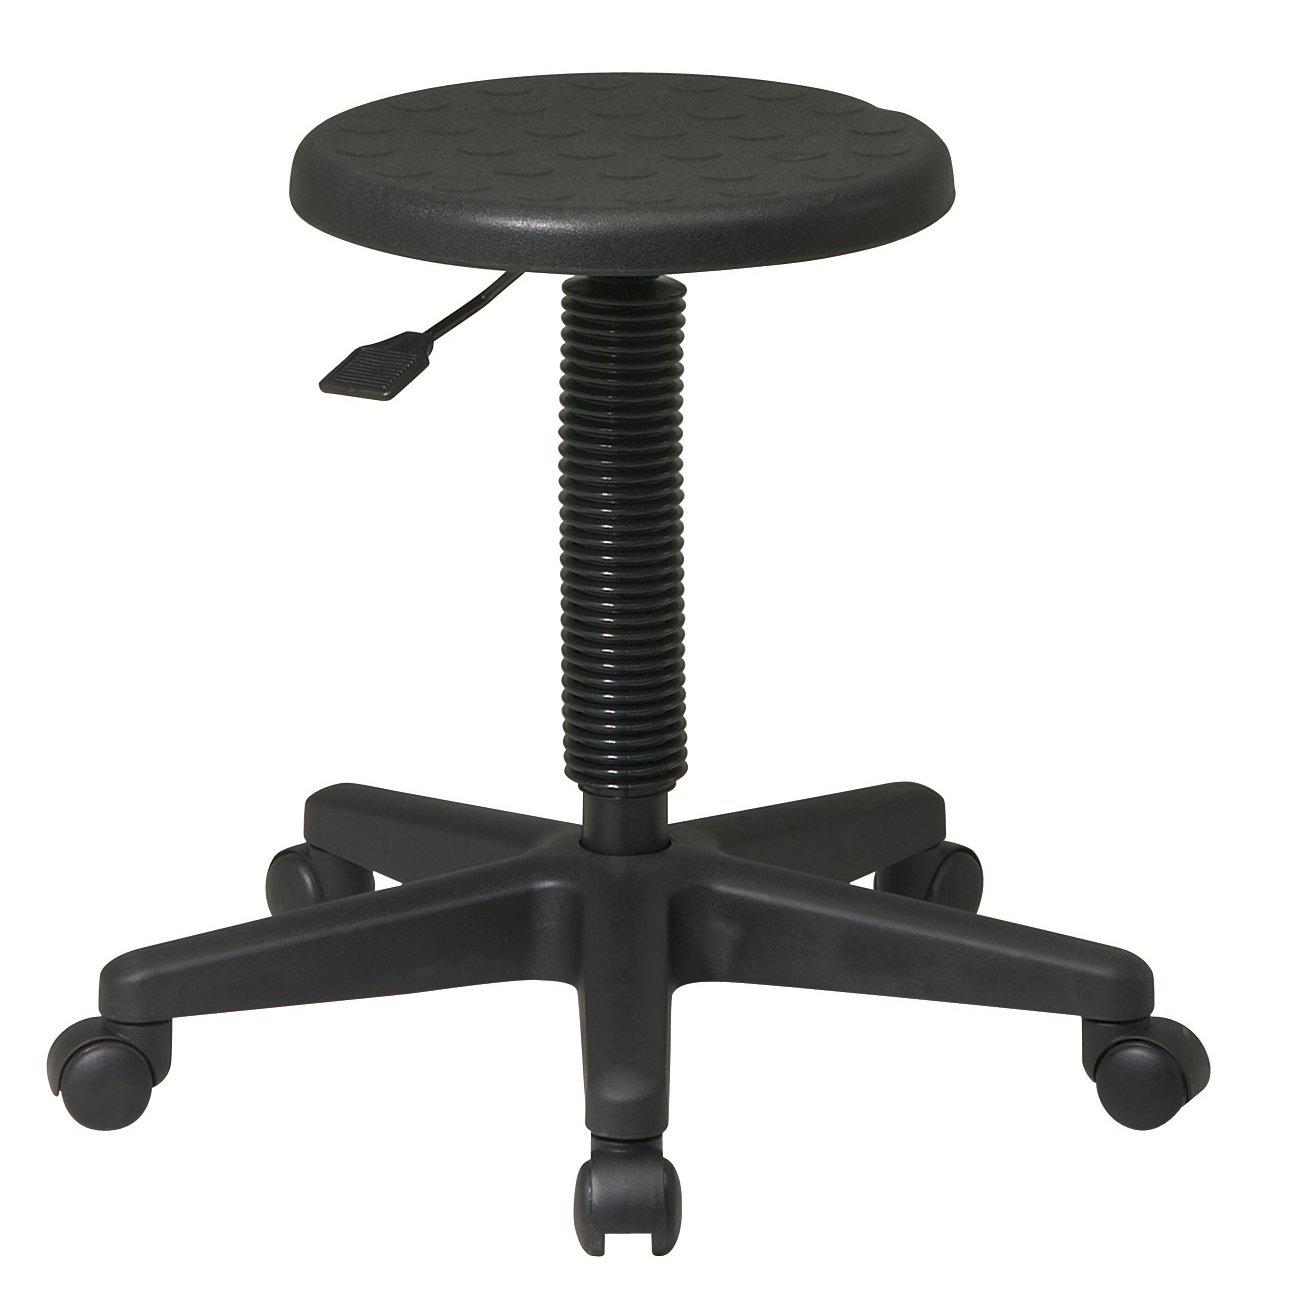 Intermediate Stool with Dual Wheel Casters